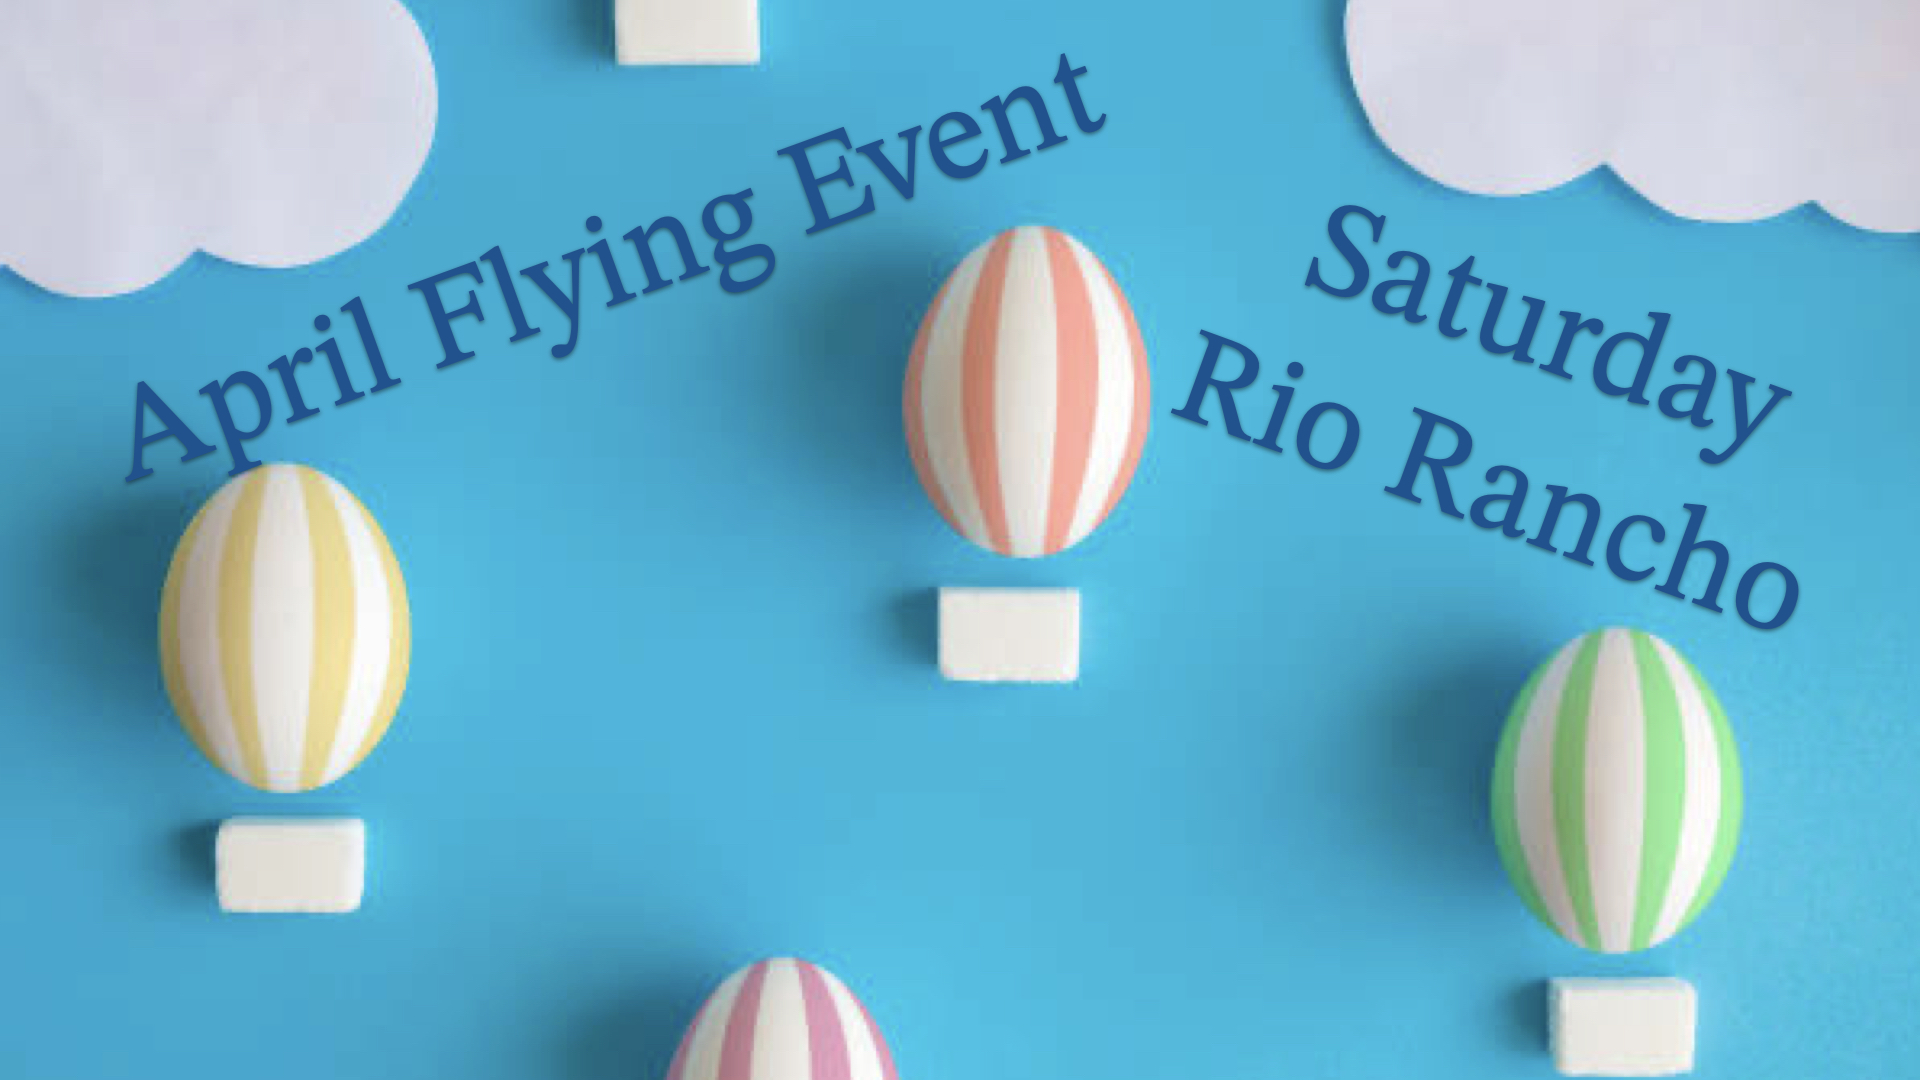 April Flying Event Saturday